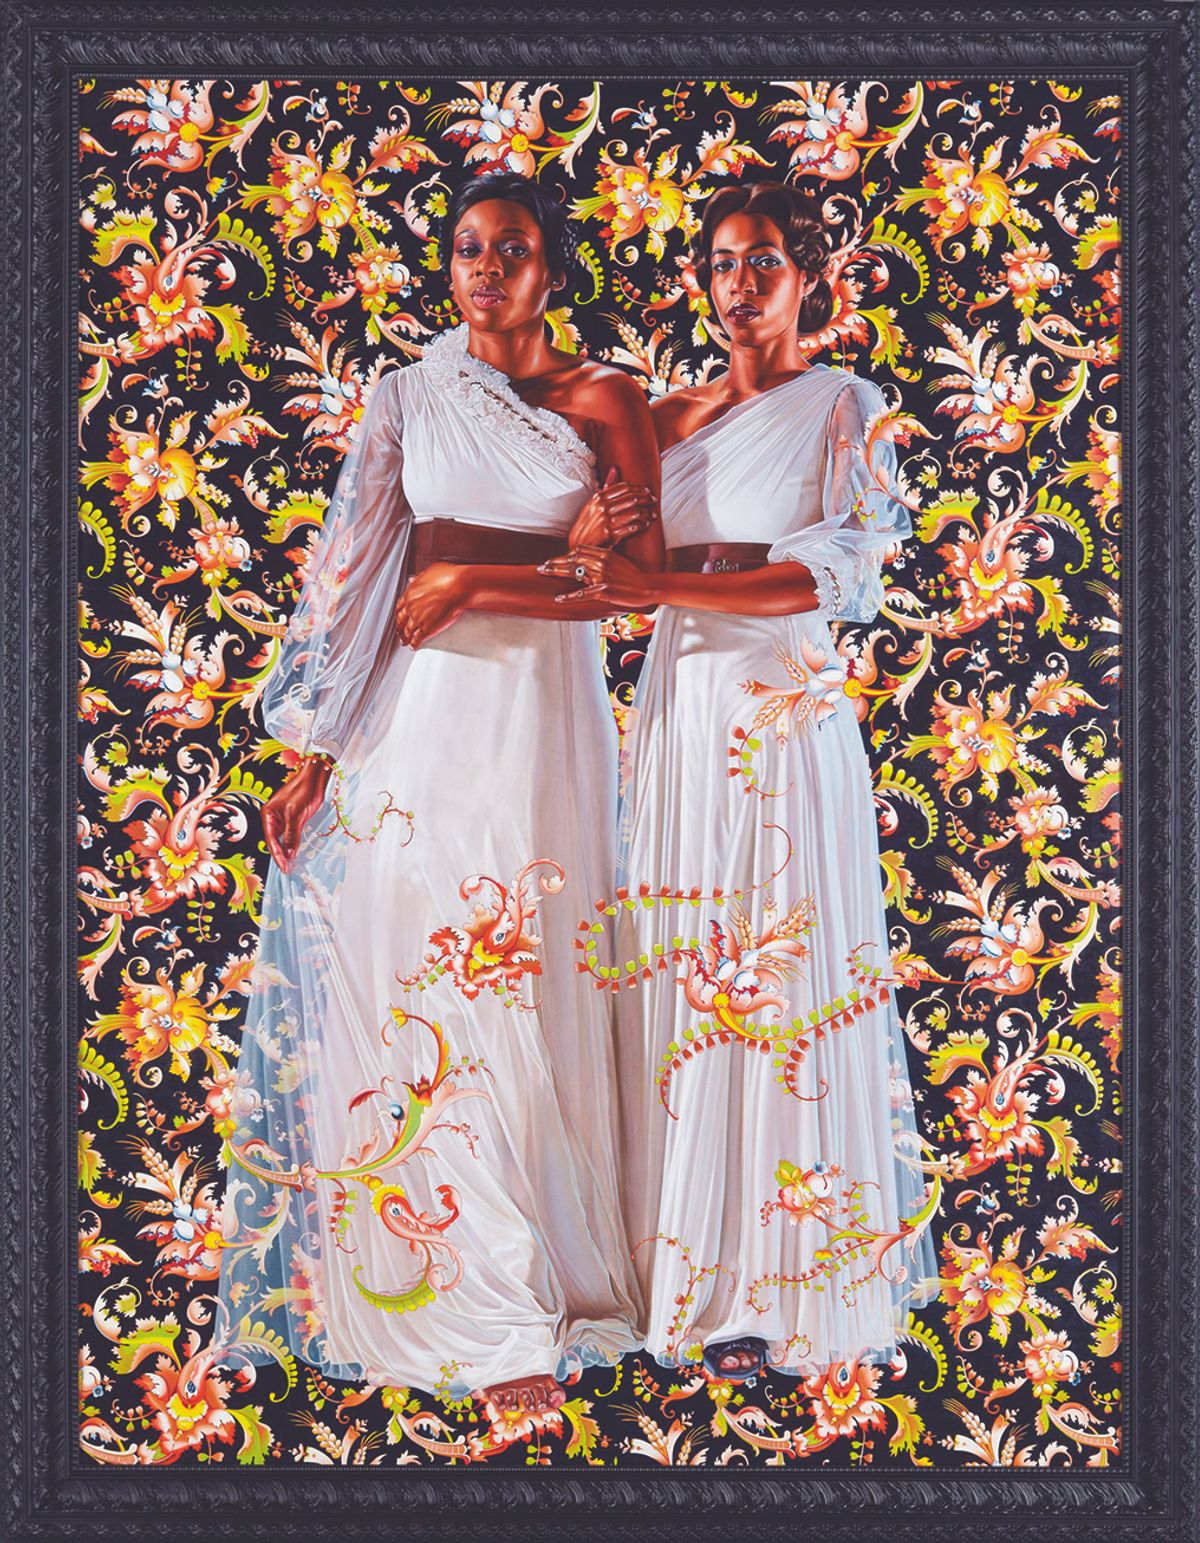 Kehinde Wiley’s The Two Sisters (2012)
© Kehinde Wiley